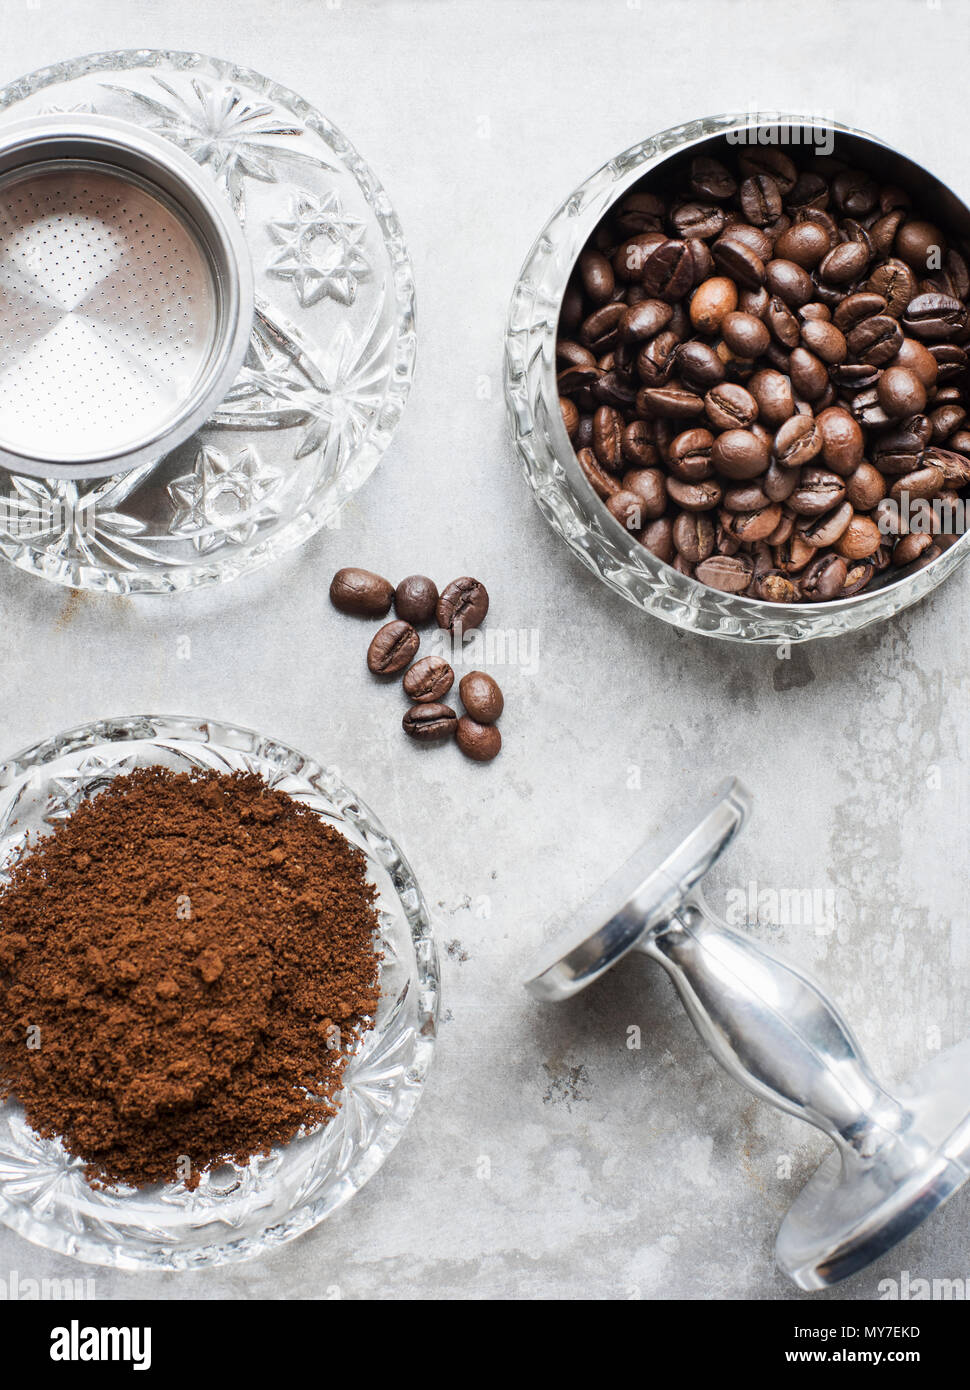 Bowls of fresh ground coffee and coffee beans, overhead view Stock Photo